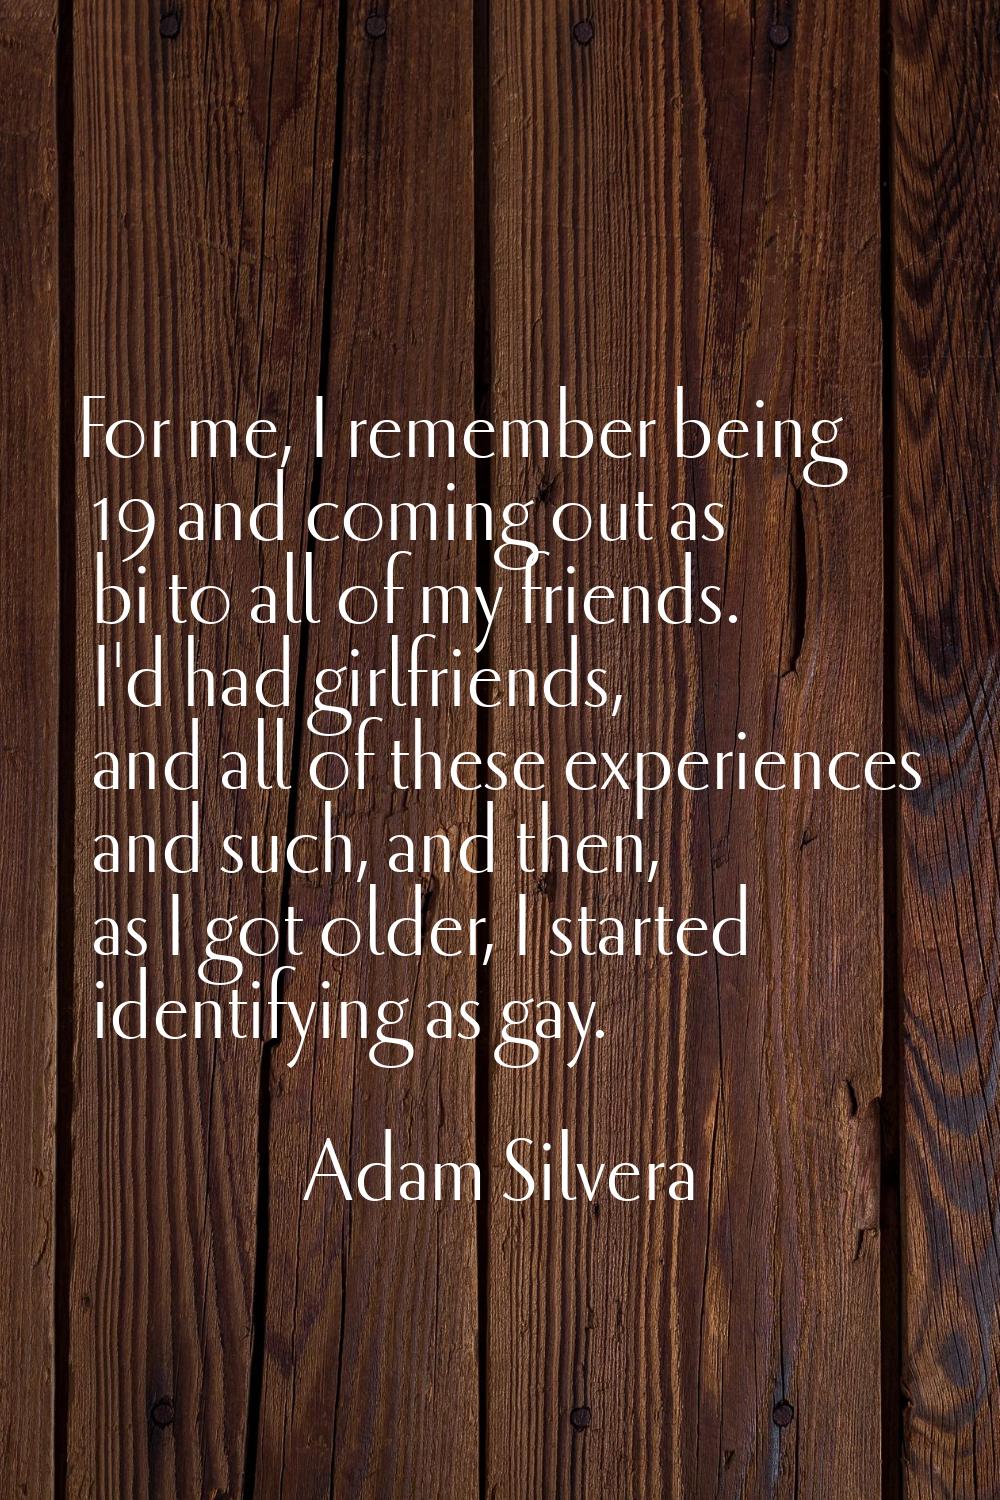 For me, I remember being 19 and coming out as bi to all of my friends. I'd had girlfriends, and all